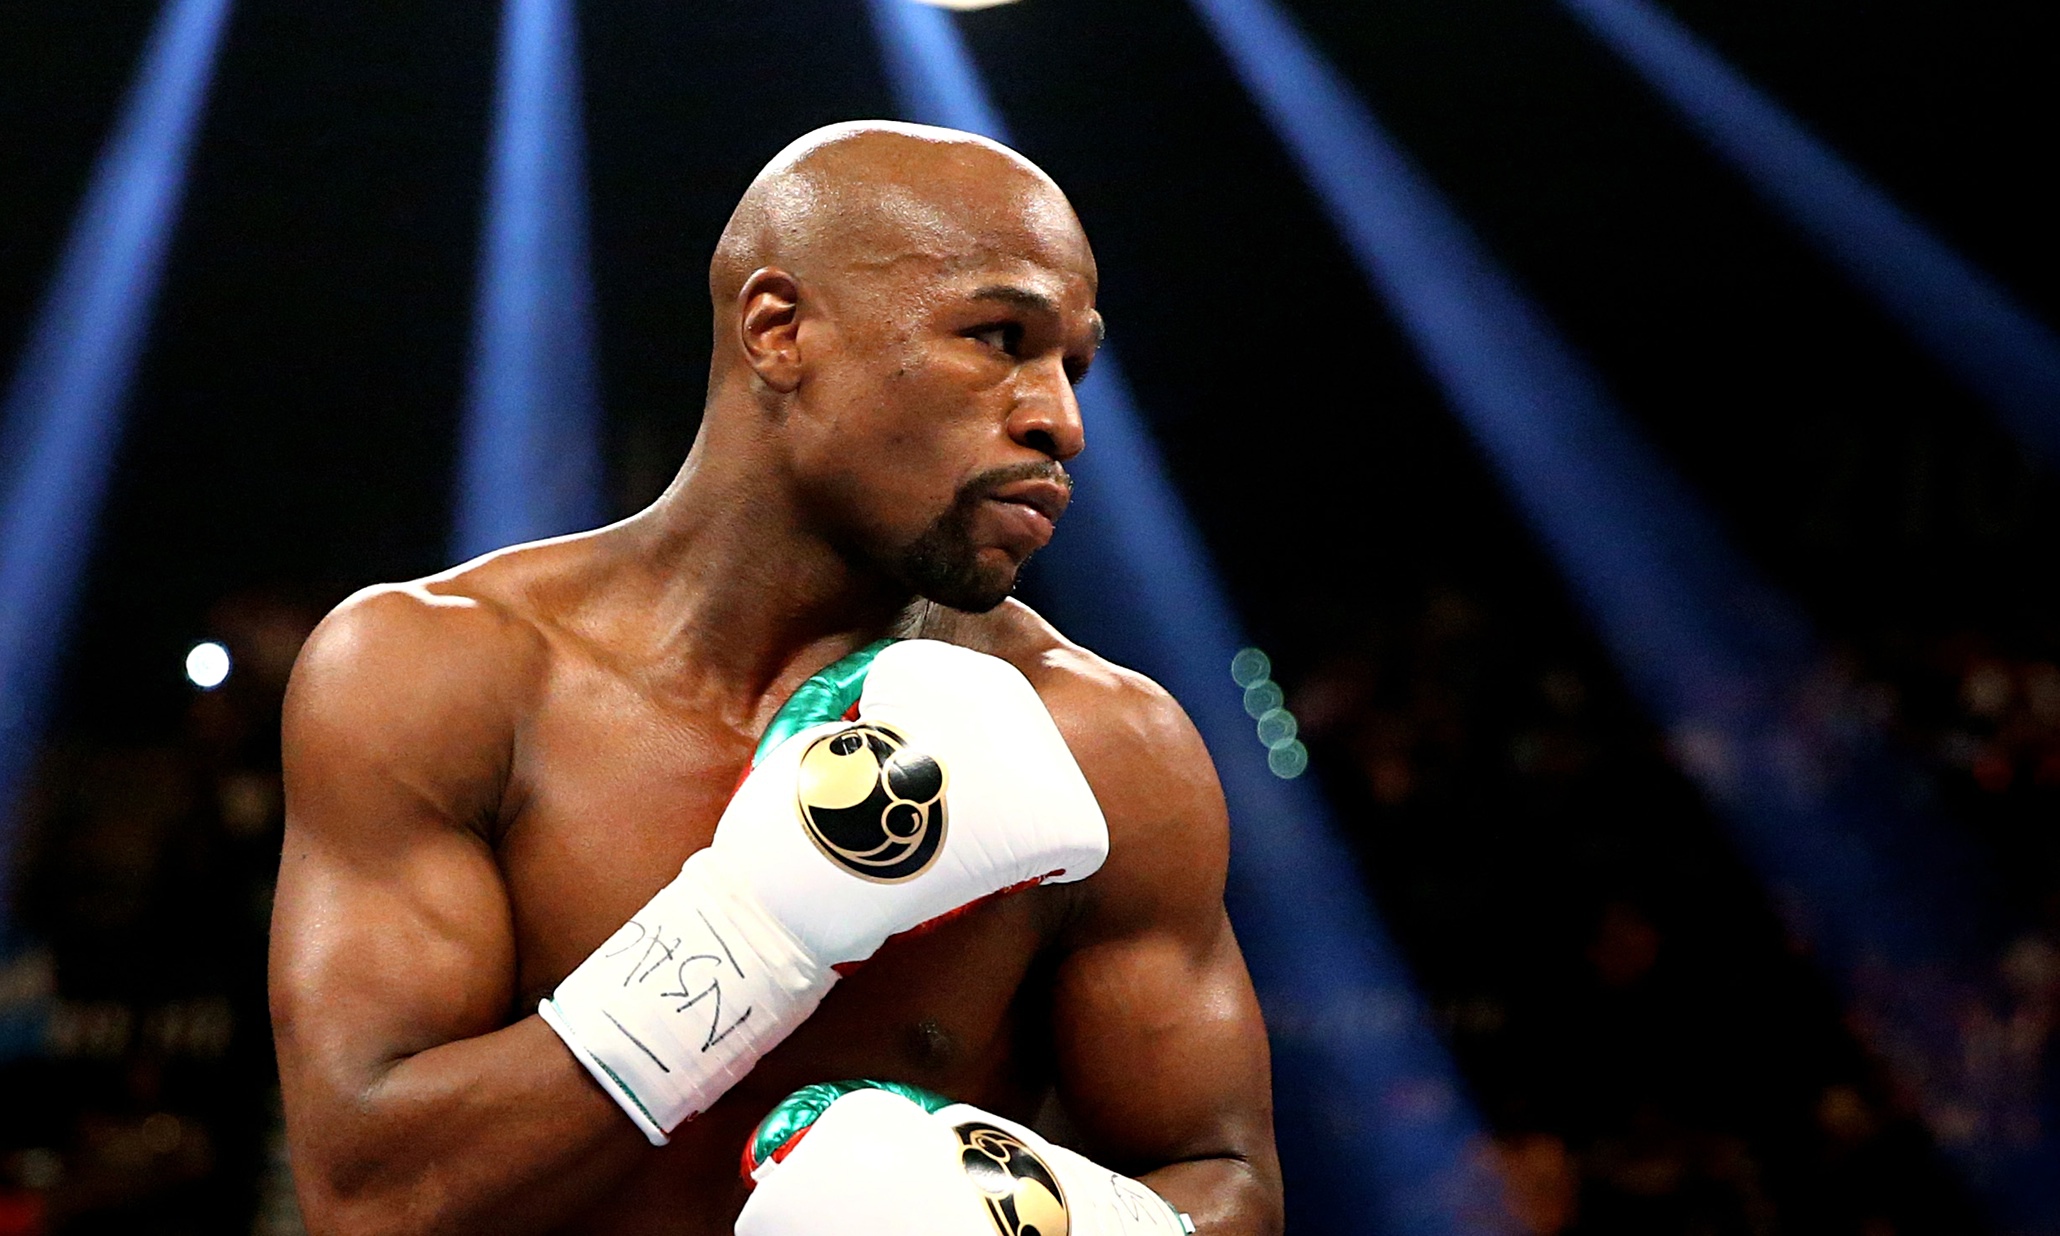 Floyd Mayweather Jr in Las Vegas for a fight described by Sugar Ray Leonard as 'about history'